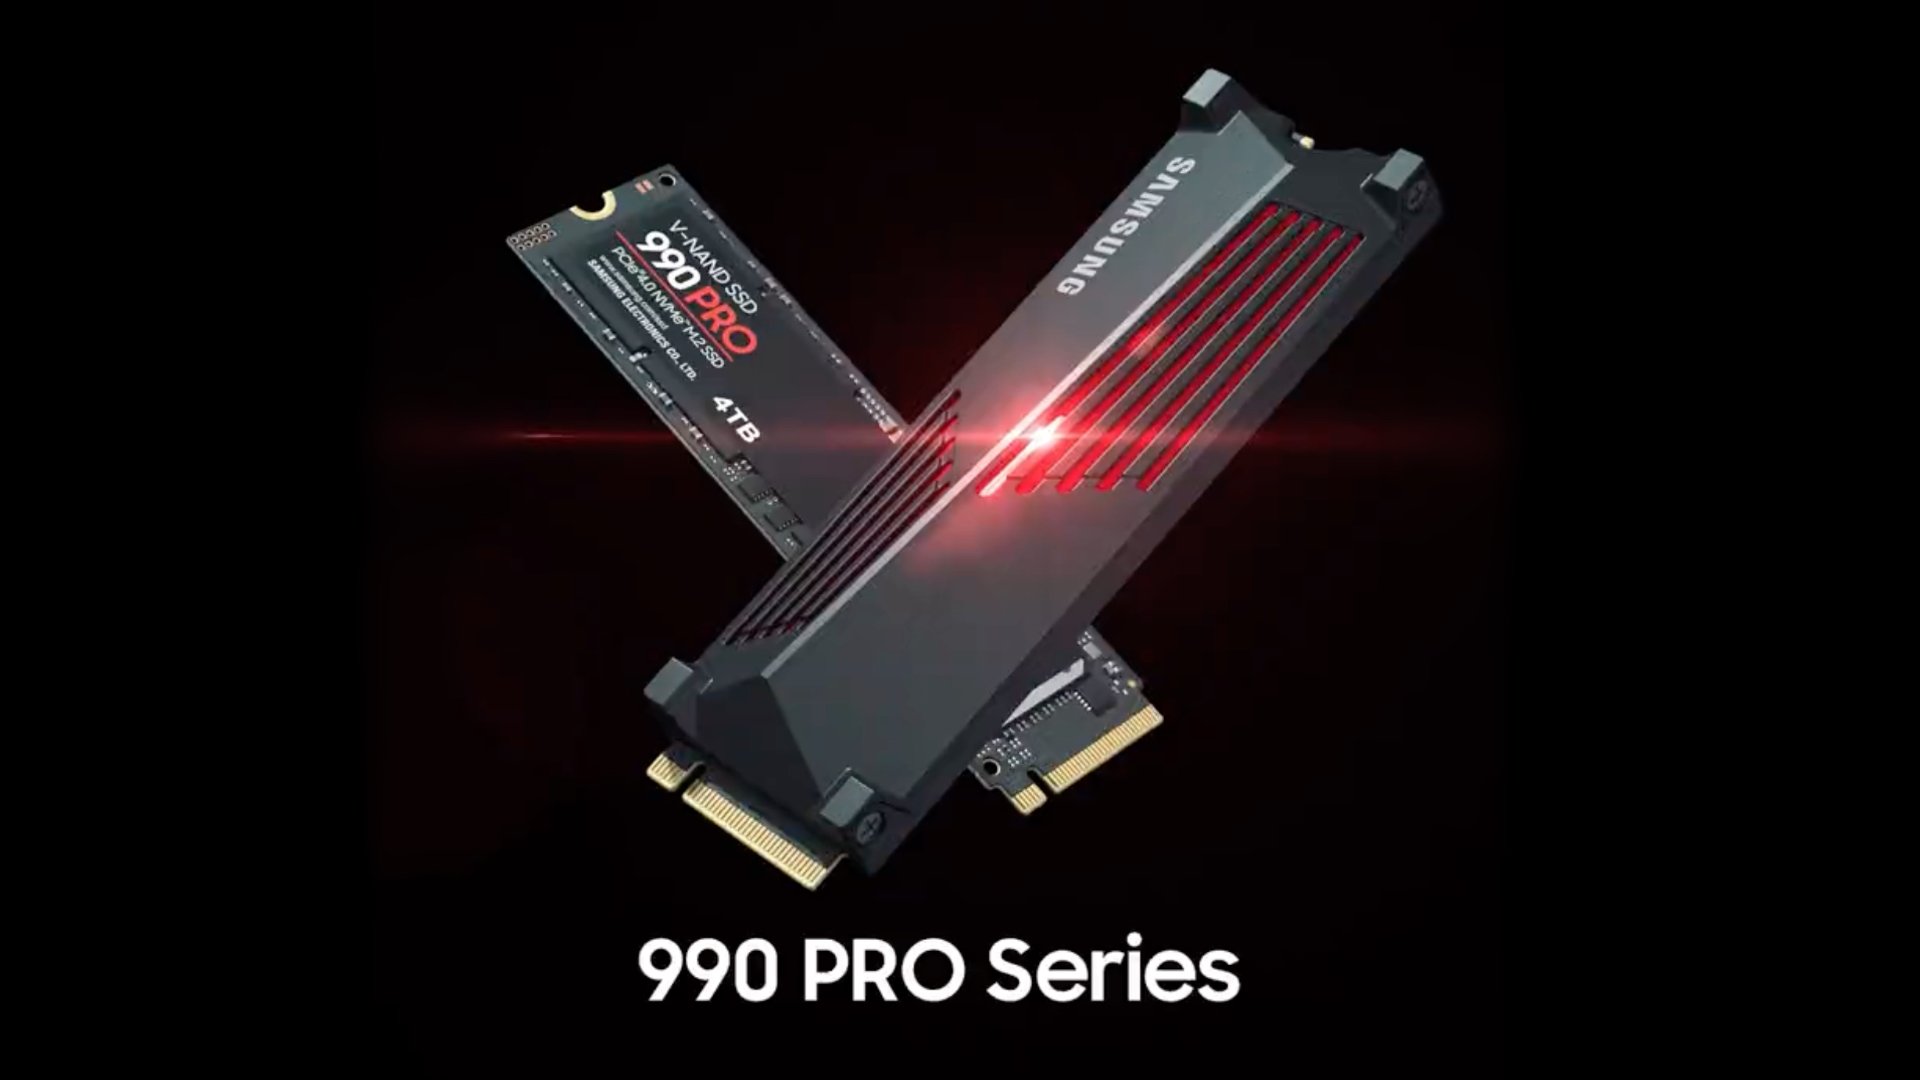 Samsung 990 PRO, PCIe 4.0 m.2 SSD with Heatsink for PS5 & PC, 1TB